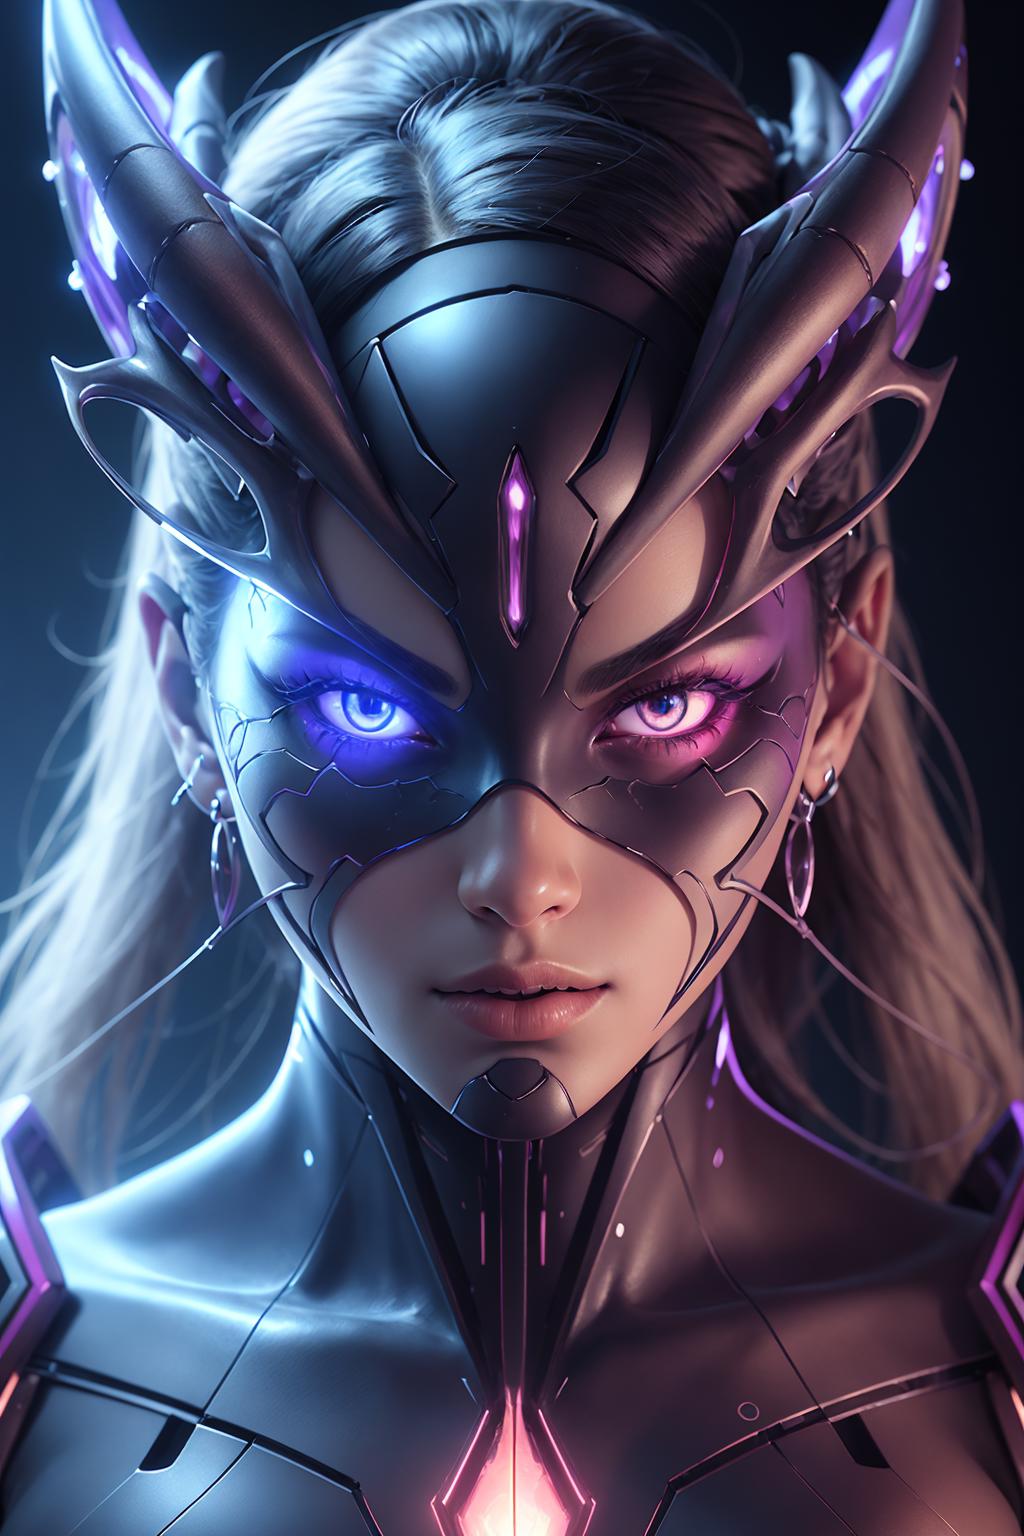 A blue and purple character with a mask, earrings, and a purple braid.